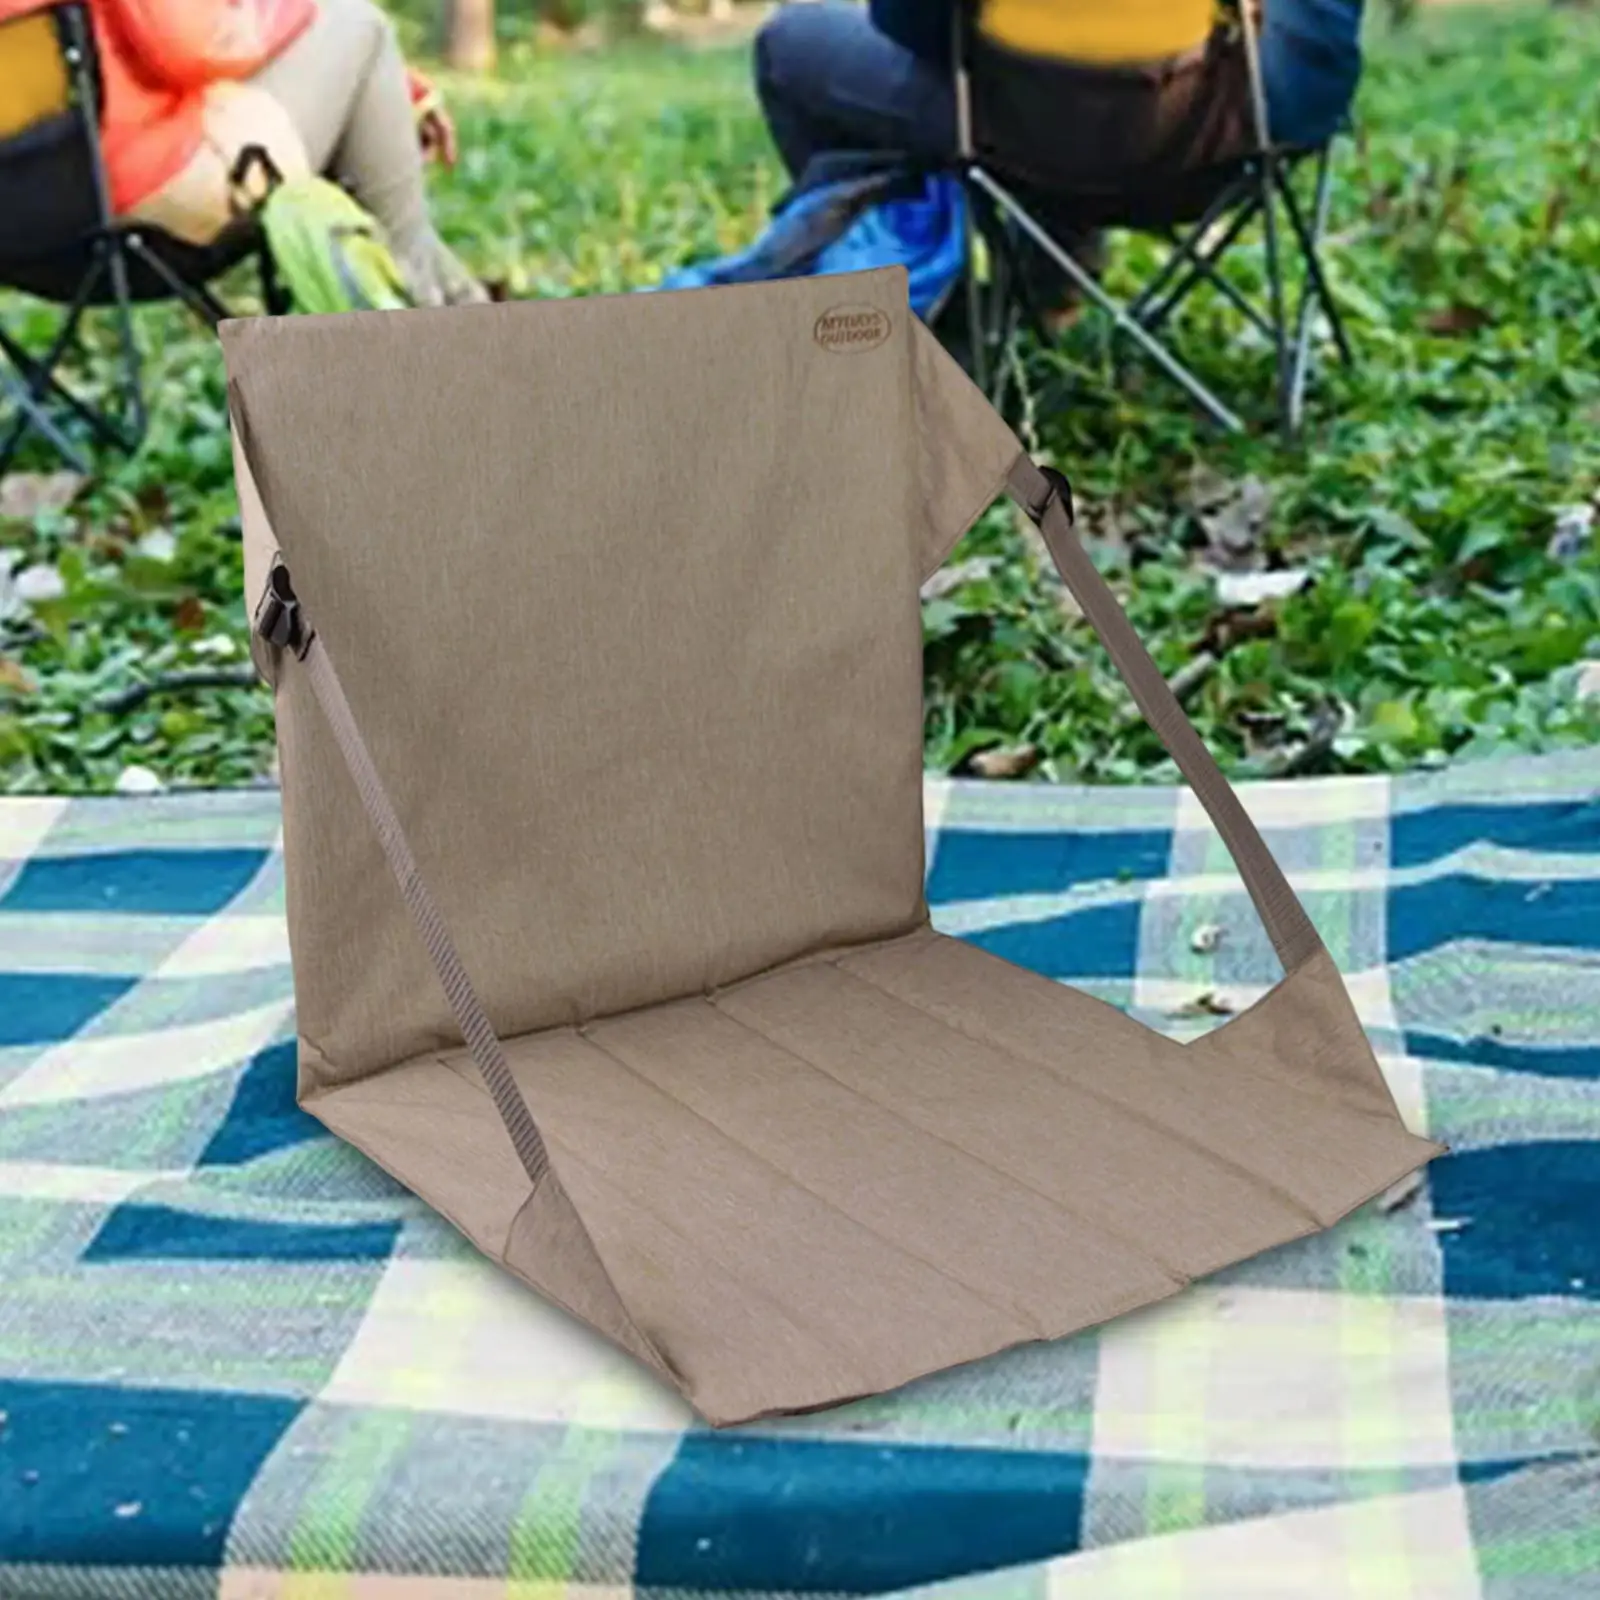 Rollable Portable Stadium Seat Cushion for Hiking Travelling Sporting